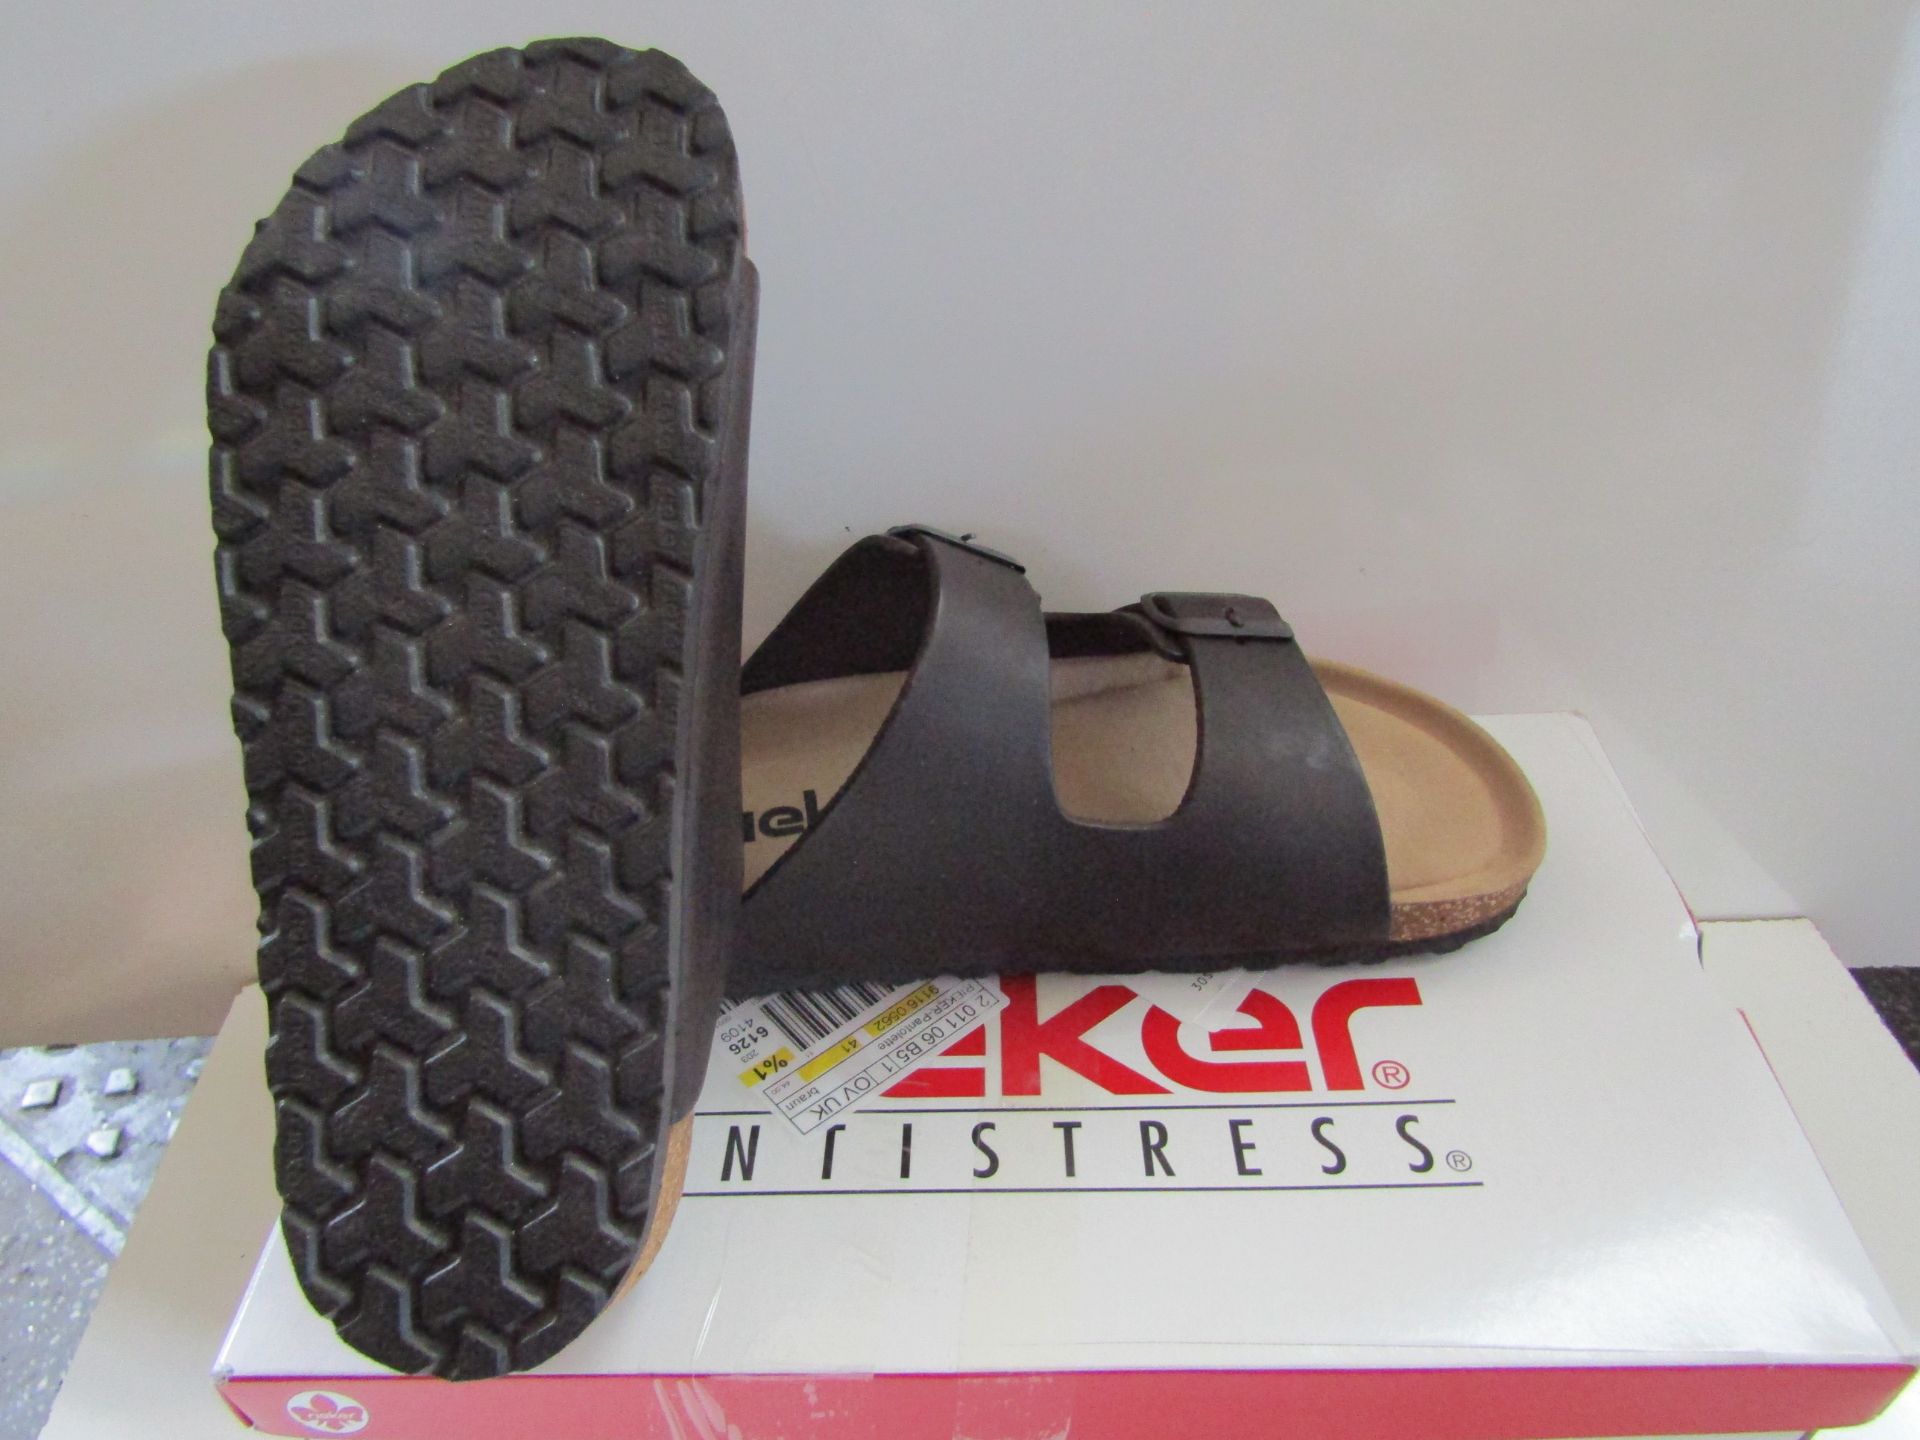 Rieker Sandal Brown Size 41 New & Boxed - Image 2 of 3